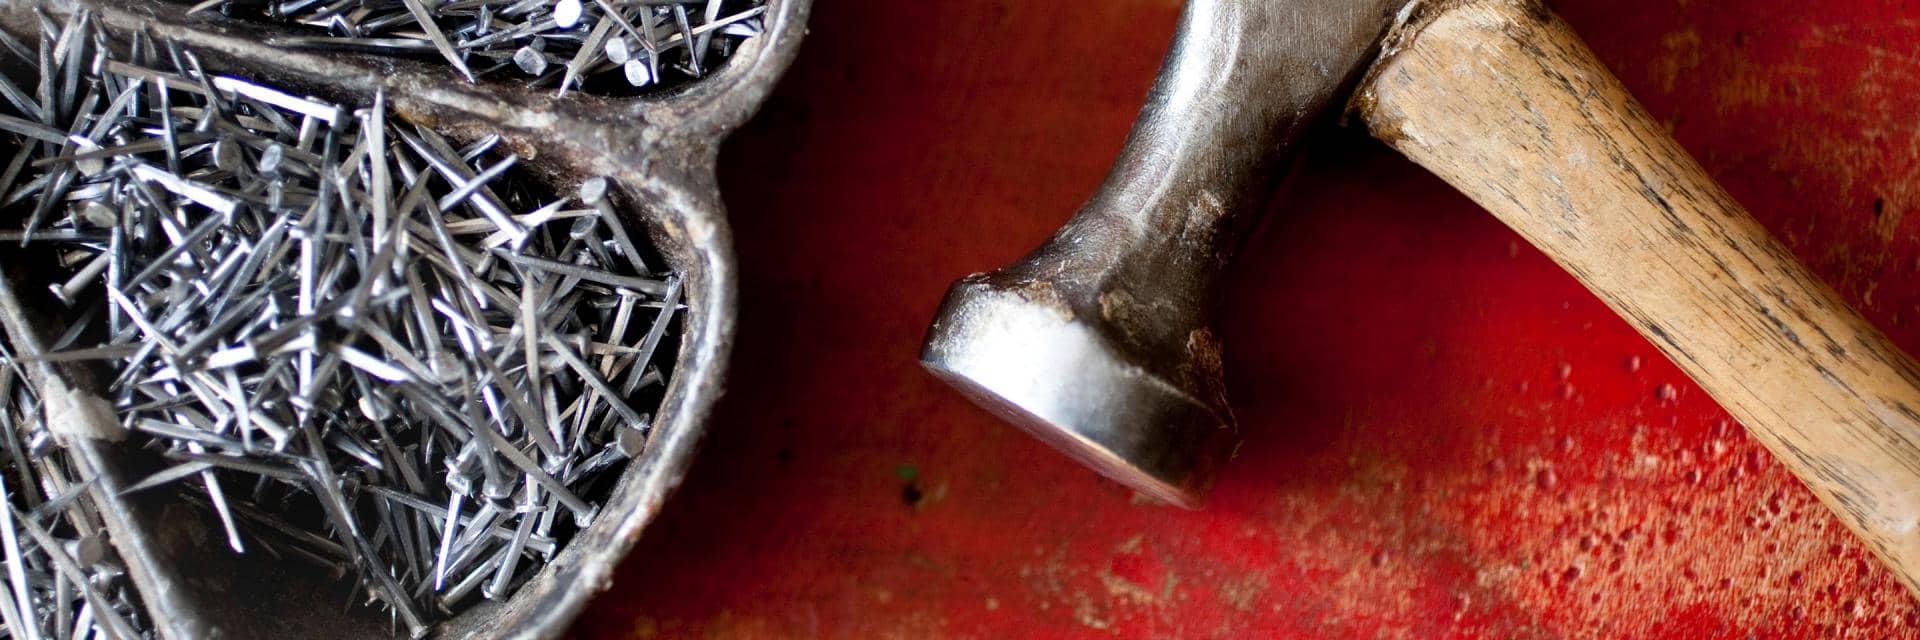  Hammer and nails on a red table.